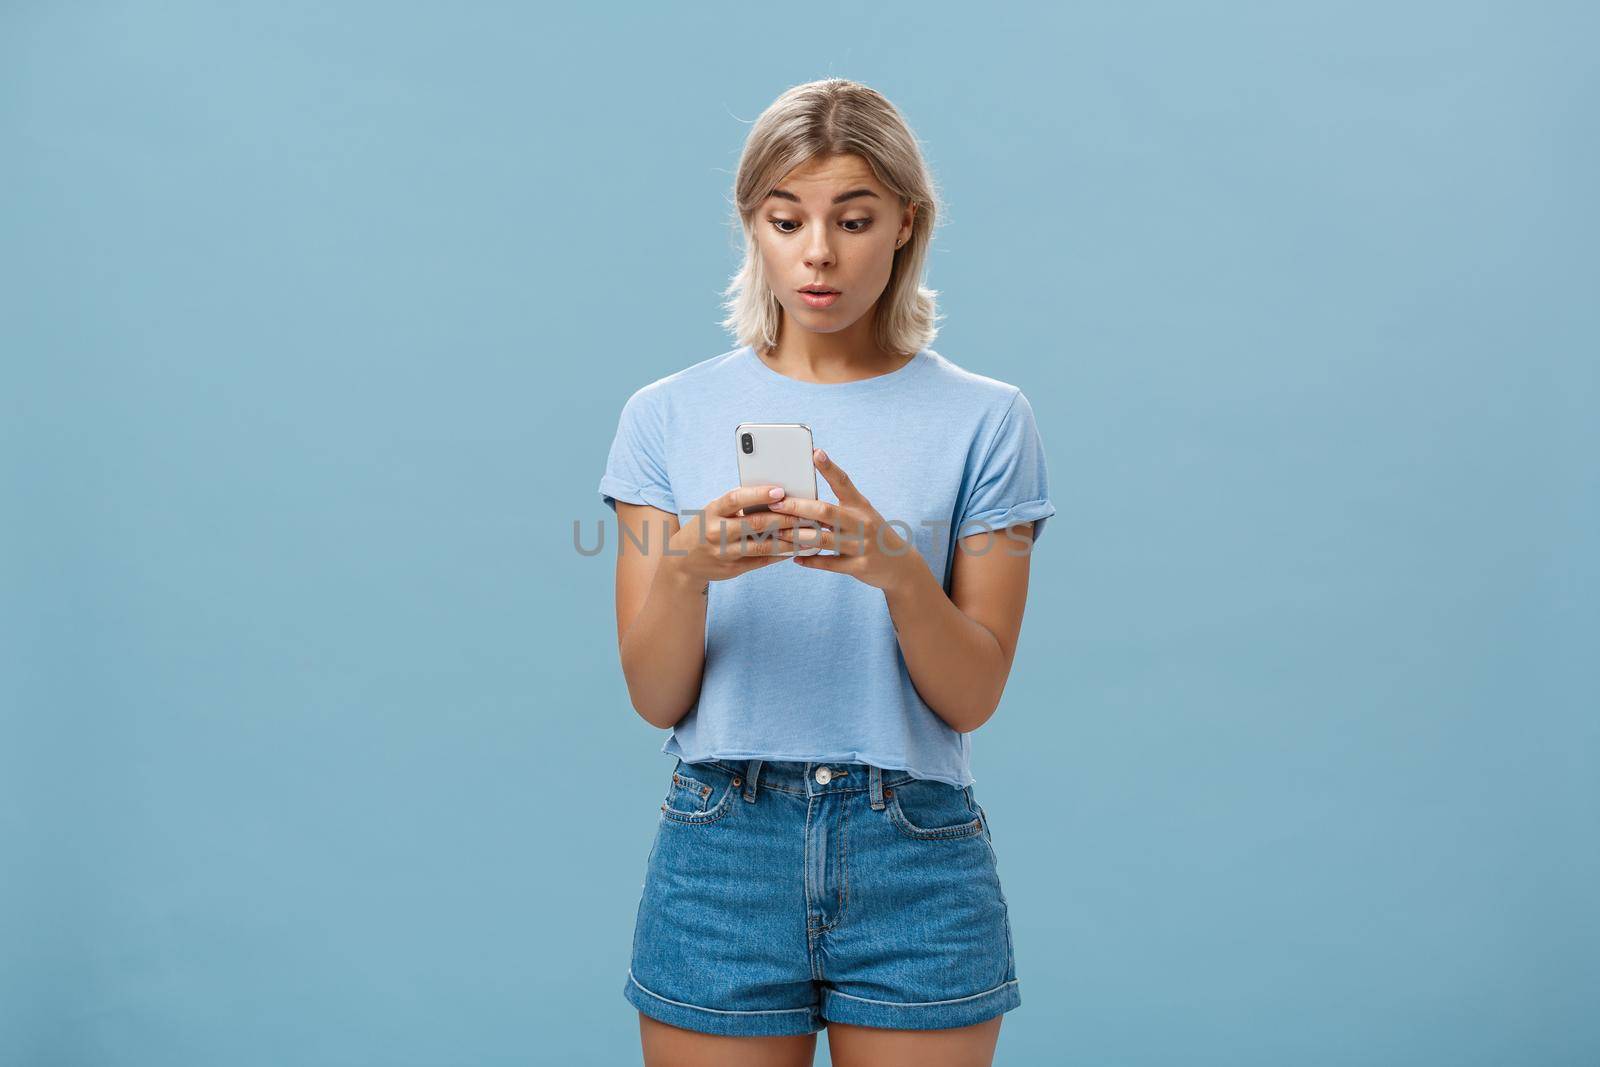 Lifestyle. Indoor shot of surprised young caucasian girl receiving unexpected invitation via smartphone reading strange message in cellphone staring stunned and confused at screen over blue background.